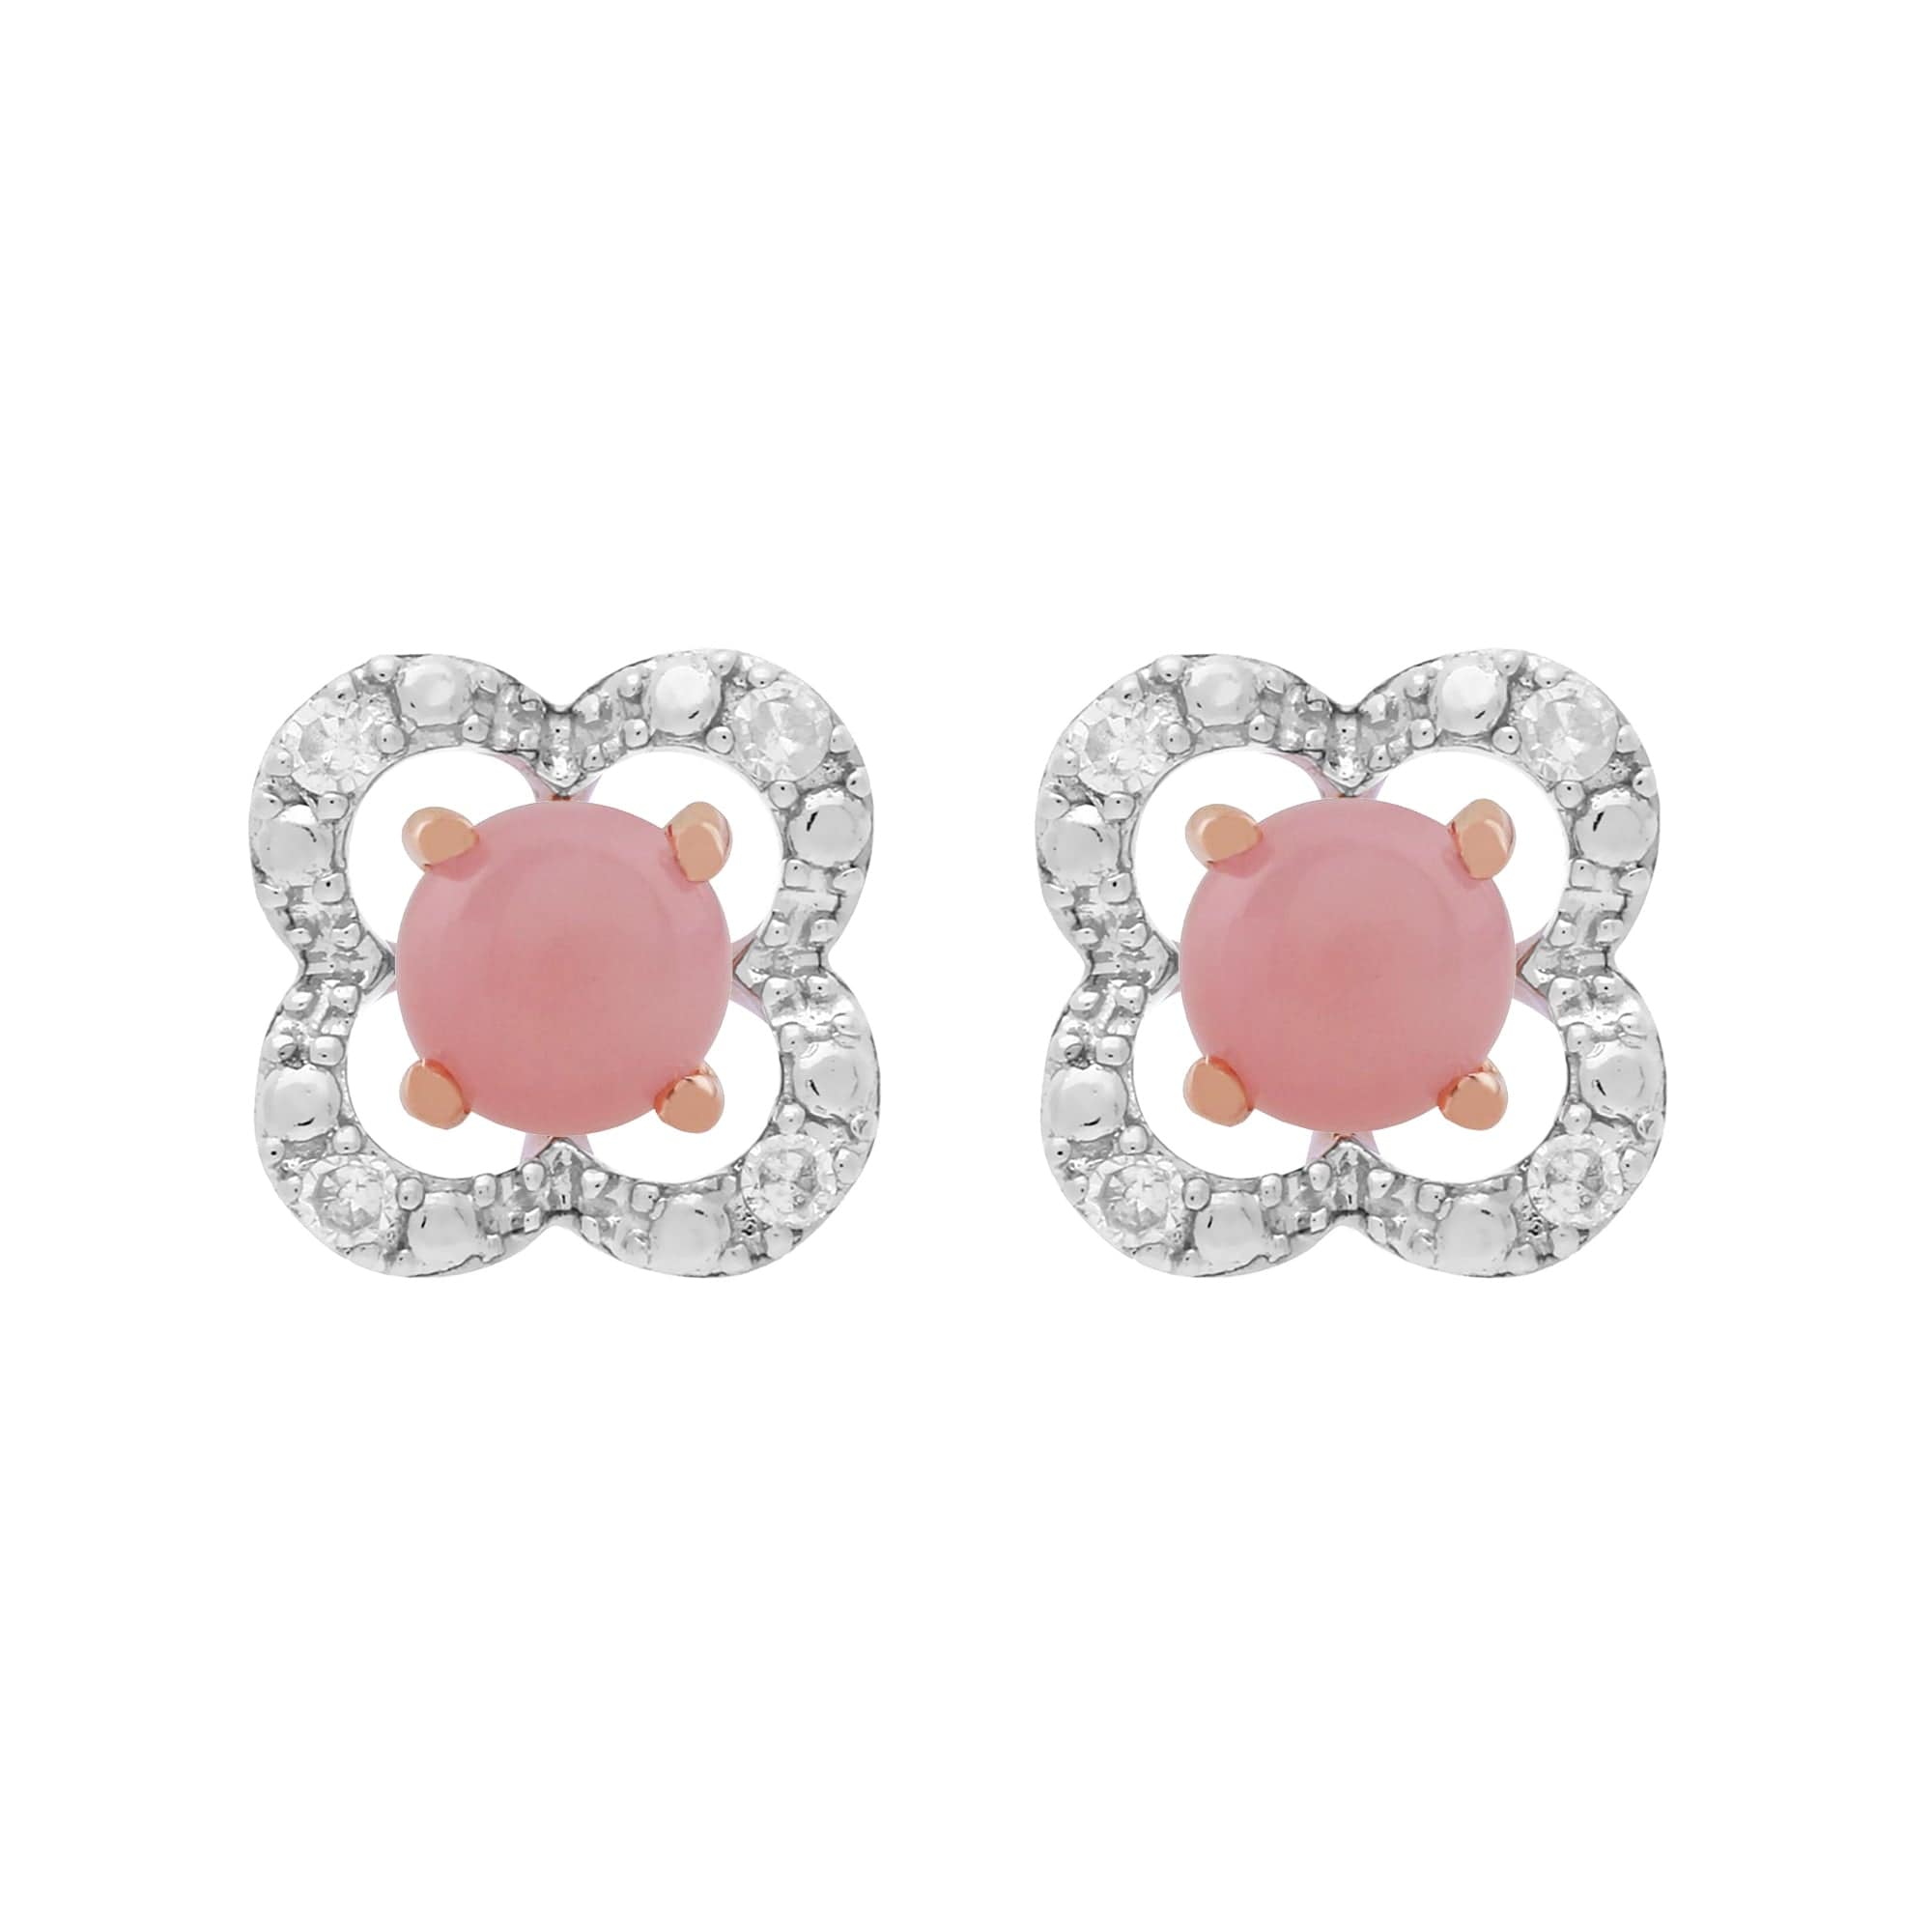 183E4316039-191E0373019 Classic Round Pink Opal Stud Earrings with Detachable Diamond Flower Jacket in 9ct Rose Gold 1